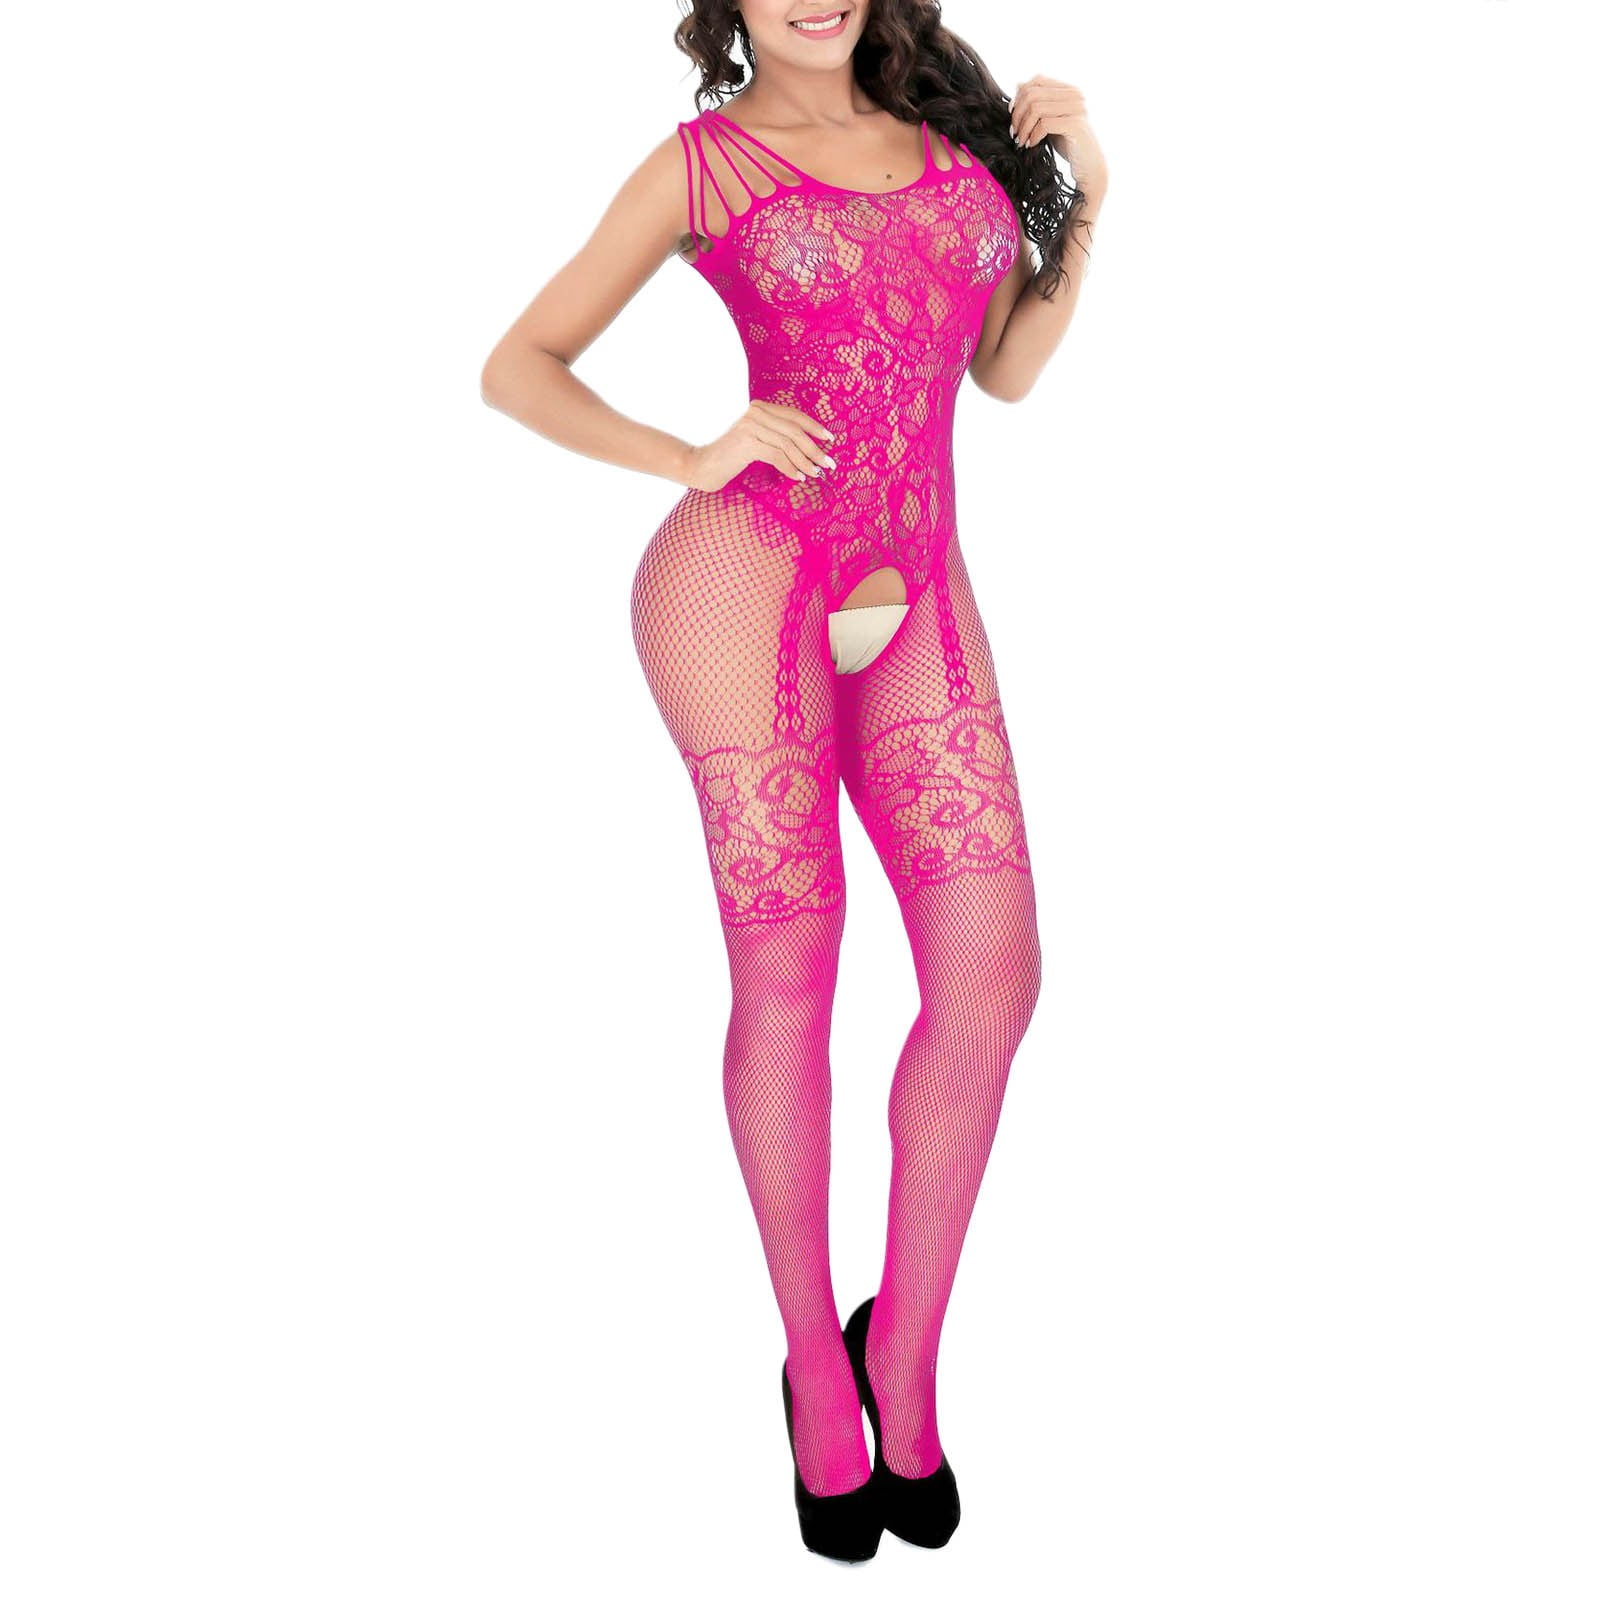 Overnight Deliveries Fishnet Bodysuits Catsuit Womens Transparent See  Through Full Body Stockings Mesh Hot Lingerie plus Size Bustier for Women  Lingerie 